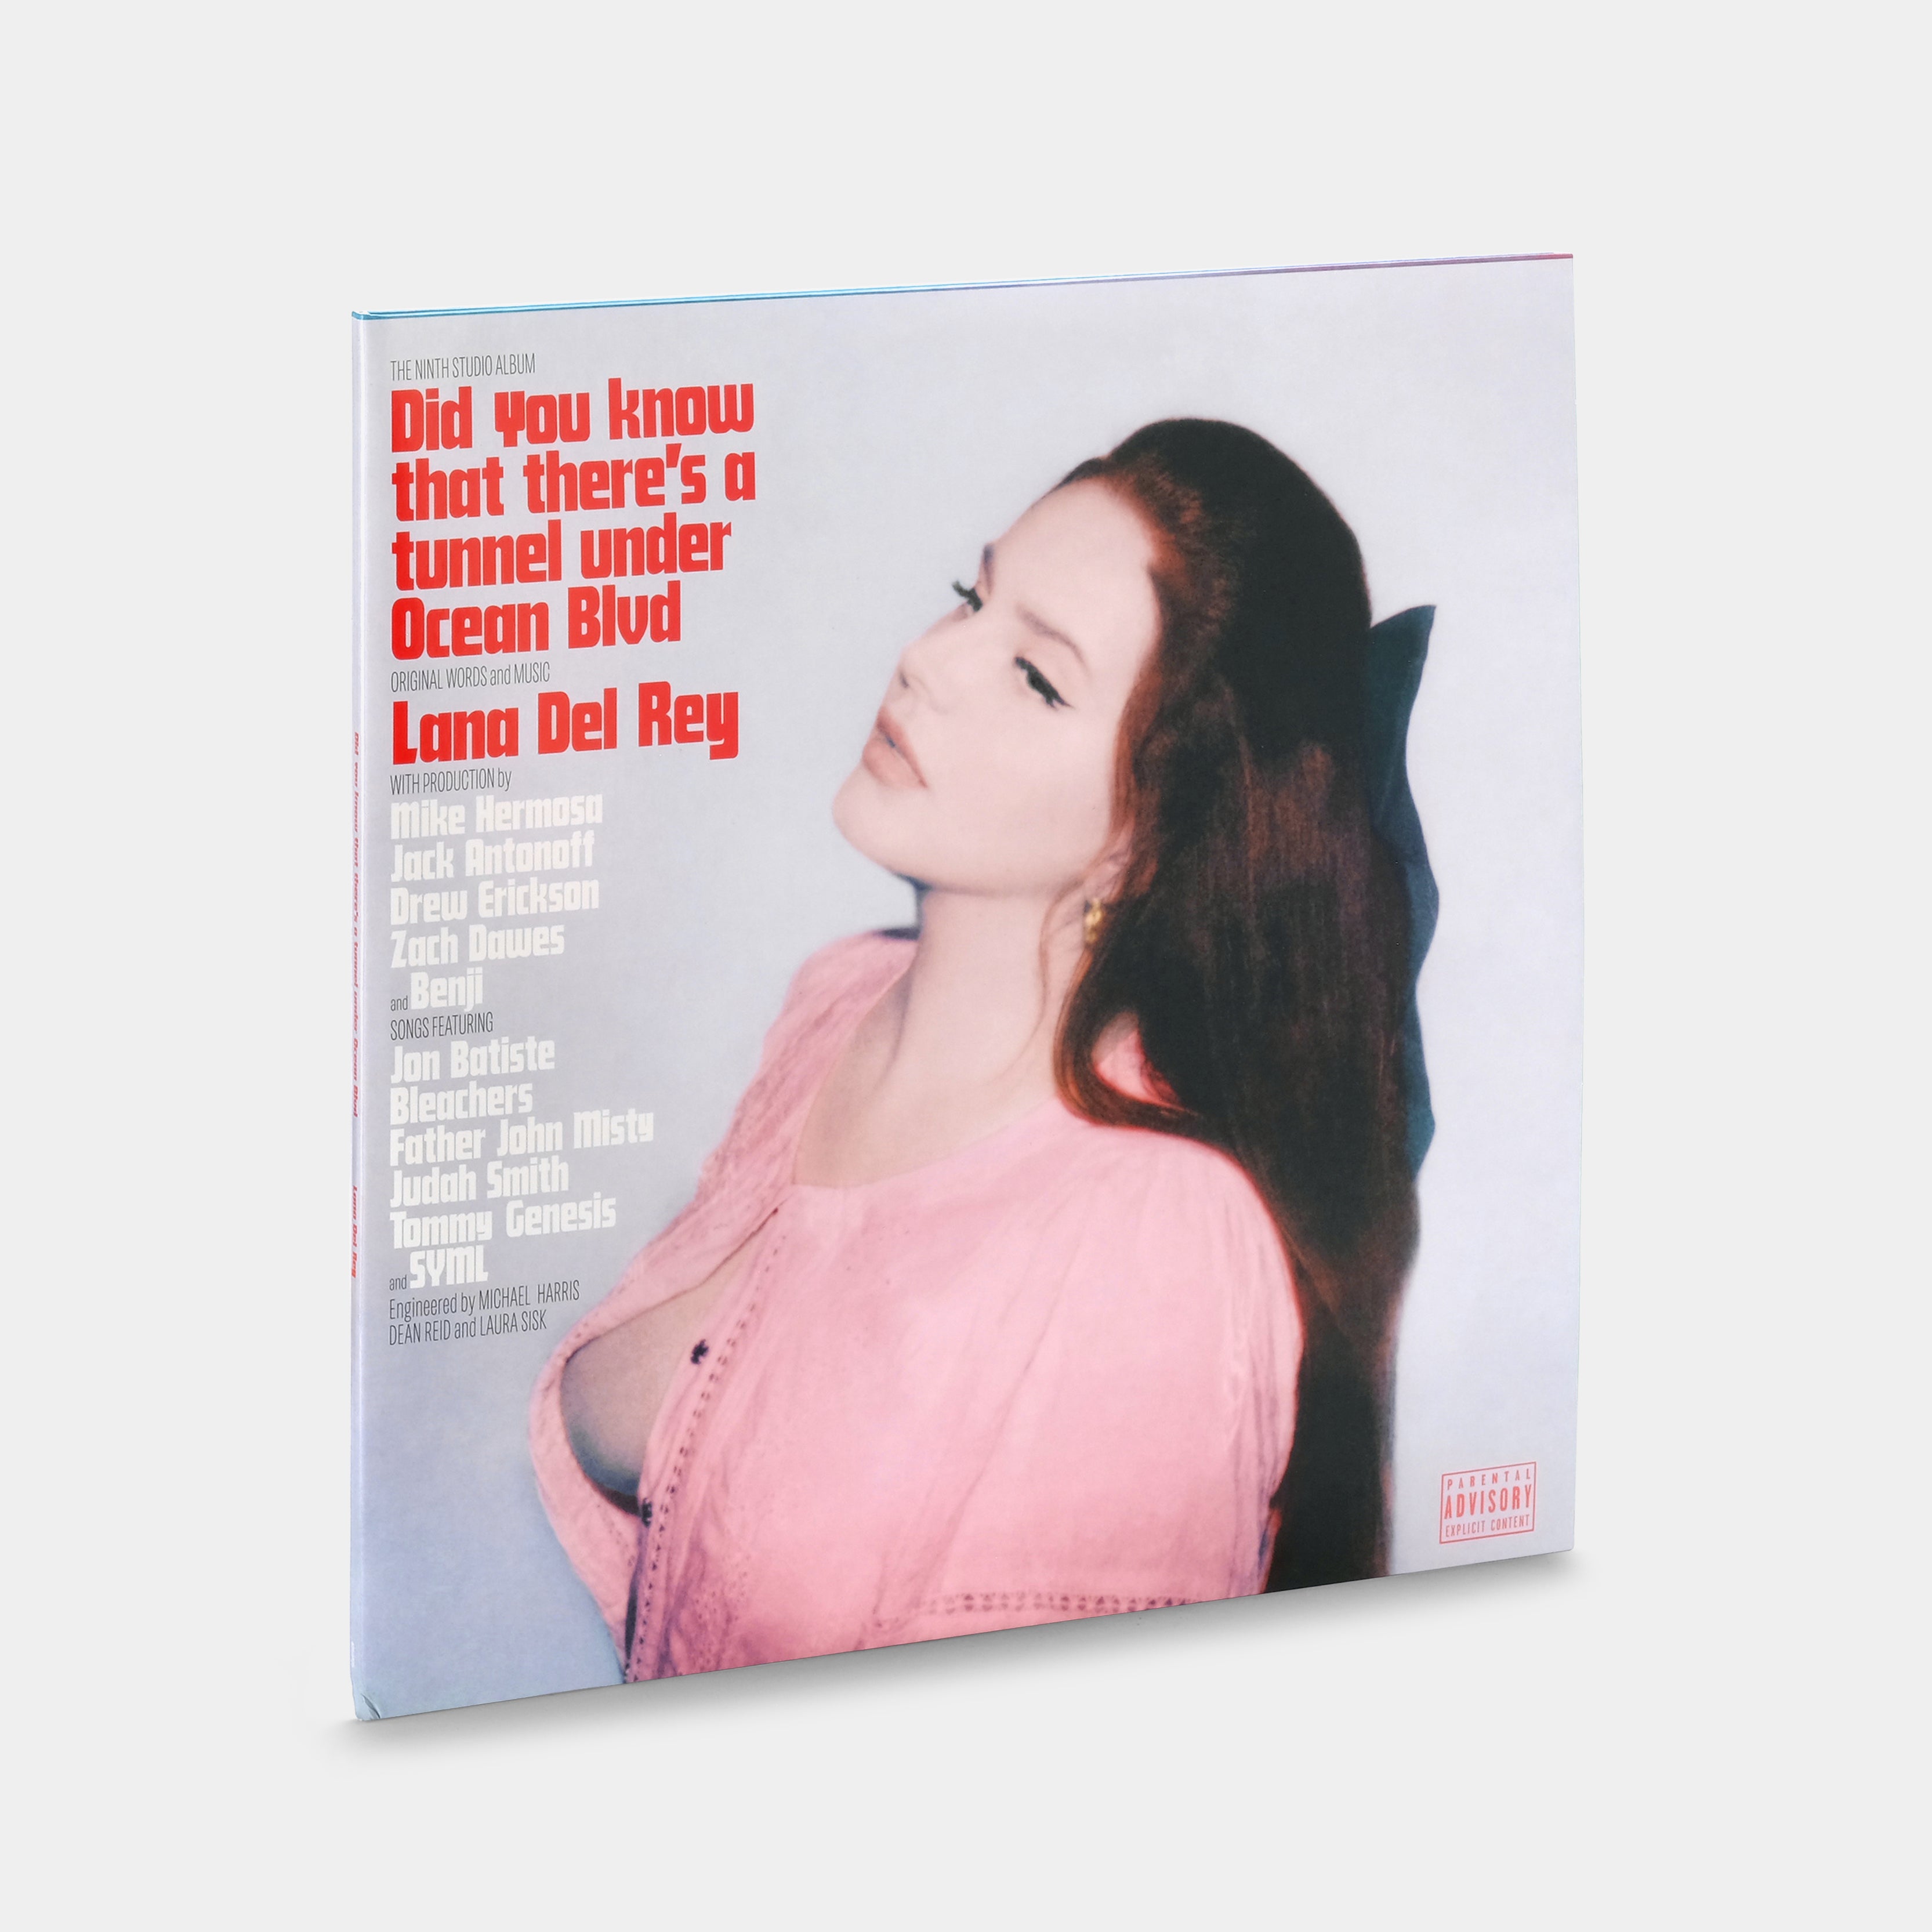 Lana Del Rey - Did You Know That There's A Tunnel Under Ocean Blvd (Alternate Artwork) 2xLP Green Vinyl Record